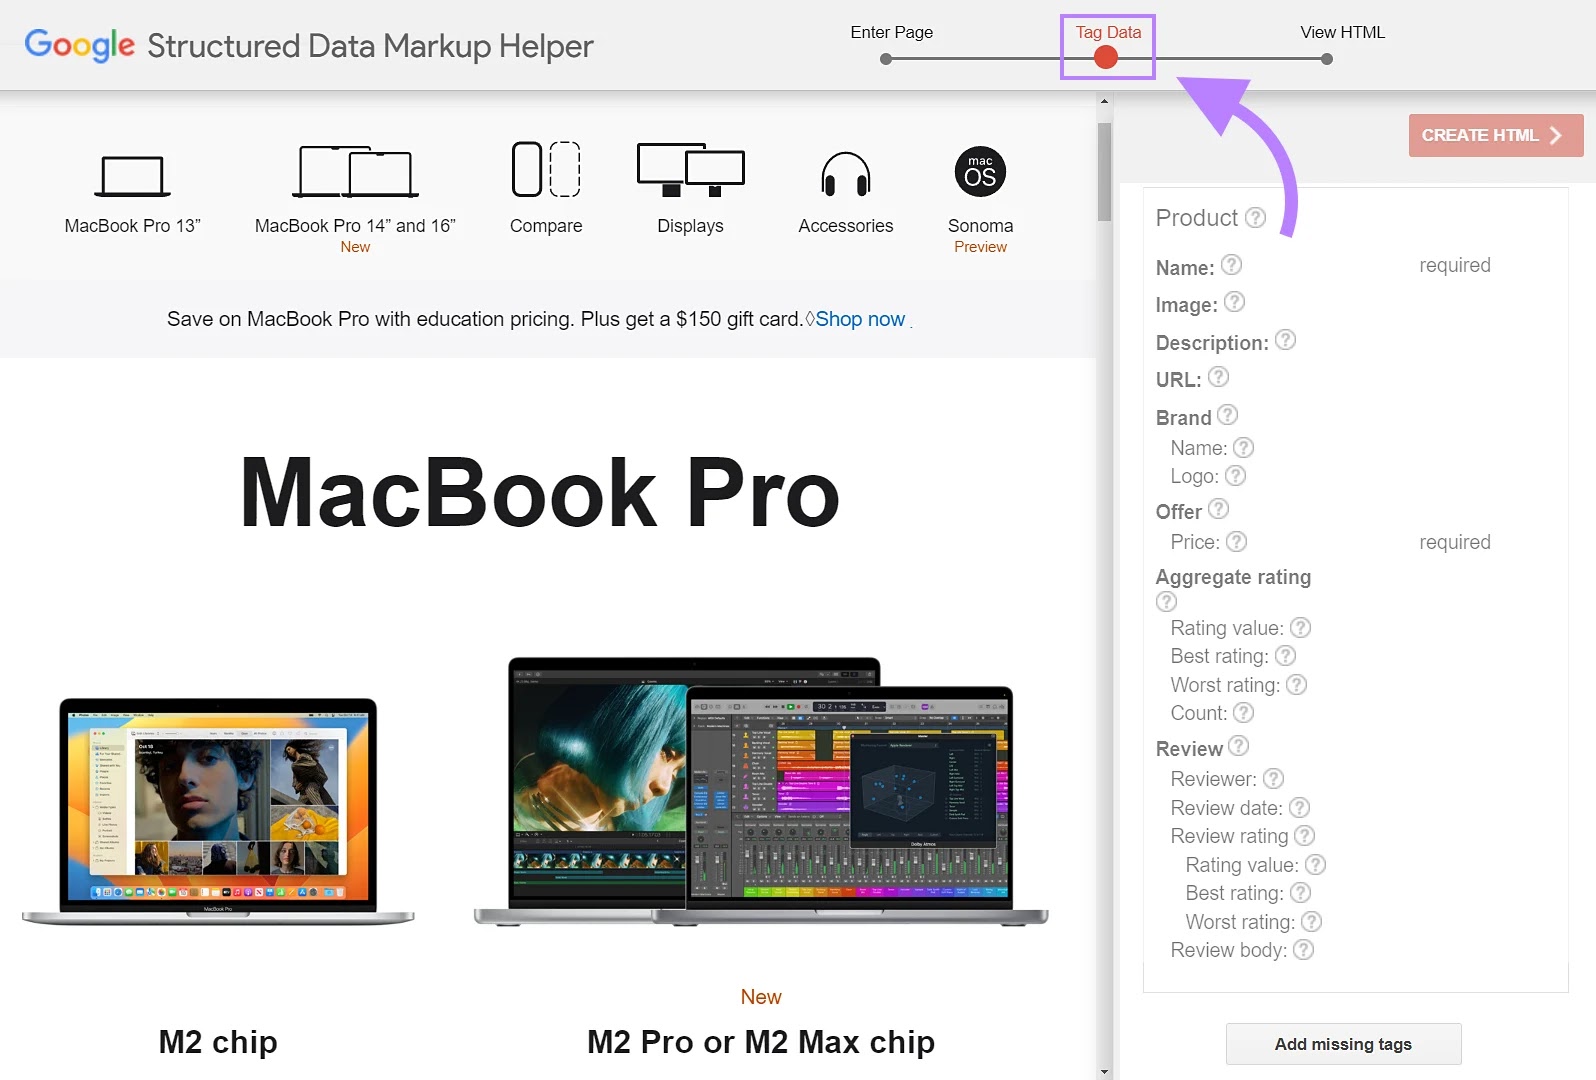 Google Structured Data Markup Helper tool showing the “Tag Data” view with the Apple Macbook Pro page as an example.